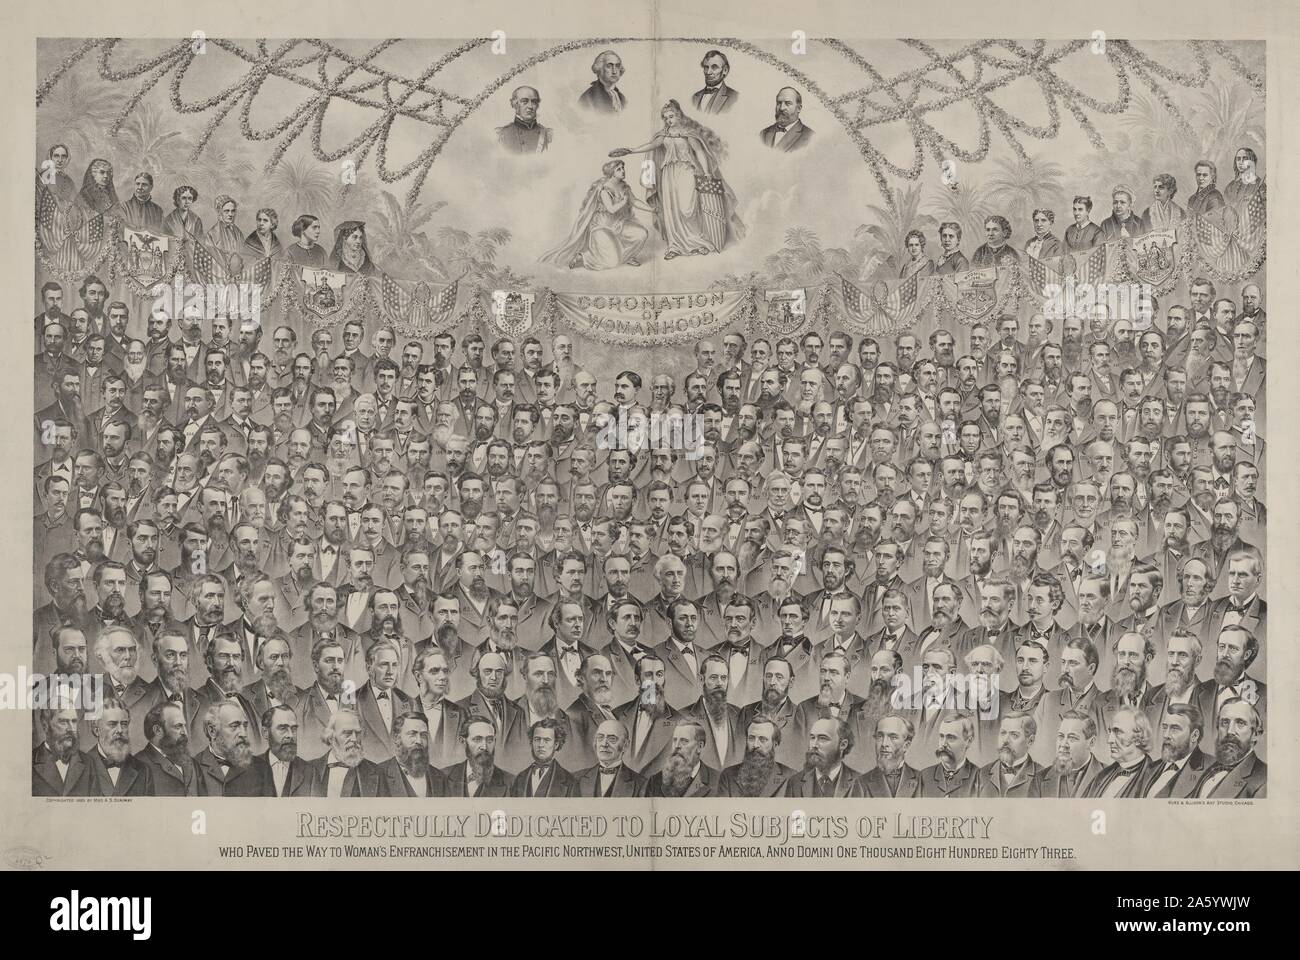 Respectfully dedicated to loyal subjects of liberty who paved the way to woman's enfranchisement in the Pacific Northwest, United States of America, anno domini one thousand eight hundred eighty three: Kurz & Allison's Art Studio c1886. Print showing a large group of bust portraits of men beneath bust portraits of several women and a banner labelled 'Coronation of Womanhood.' Stock Photo